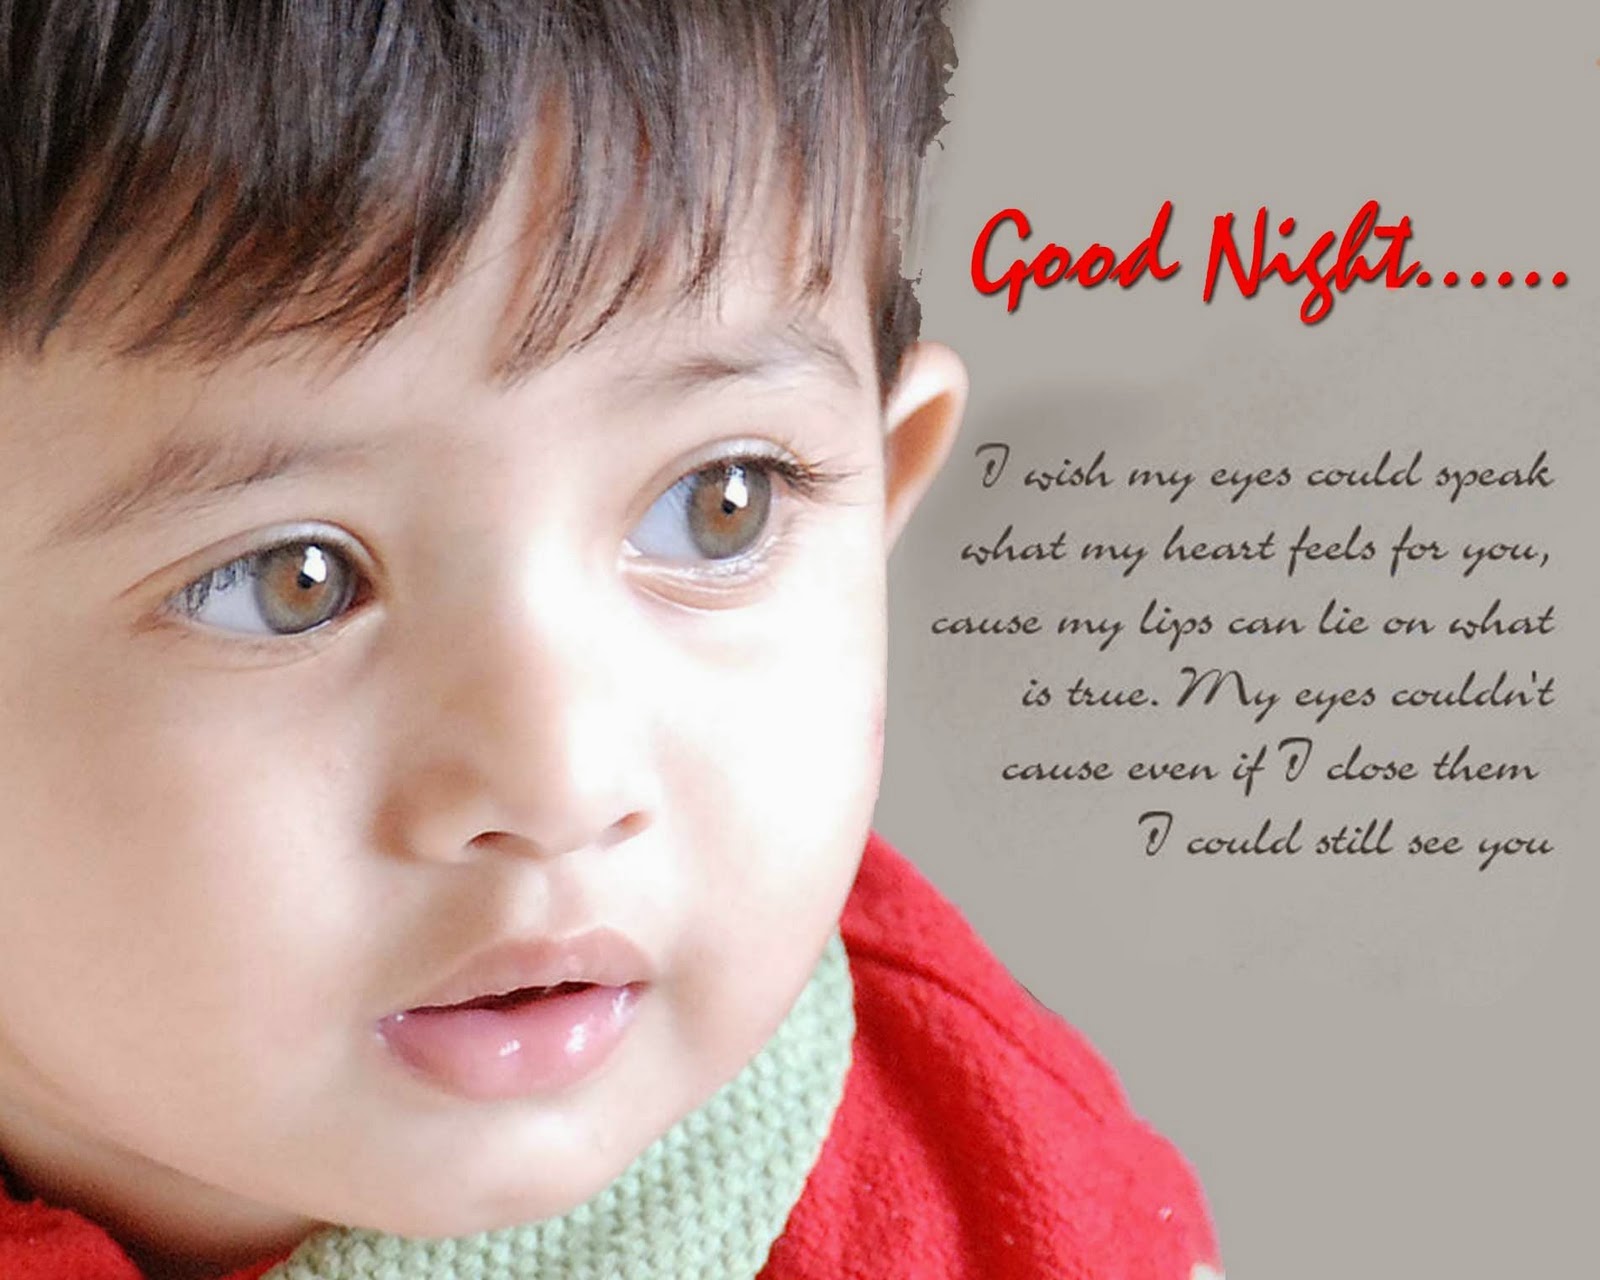 Good Night Quote Wallpaper - Cute Baby Photos With Love Messages -  1600x1280 Wallpaper 